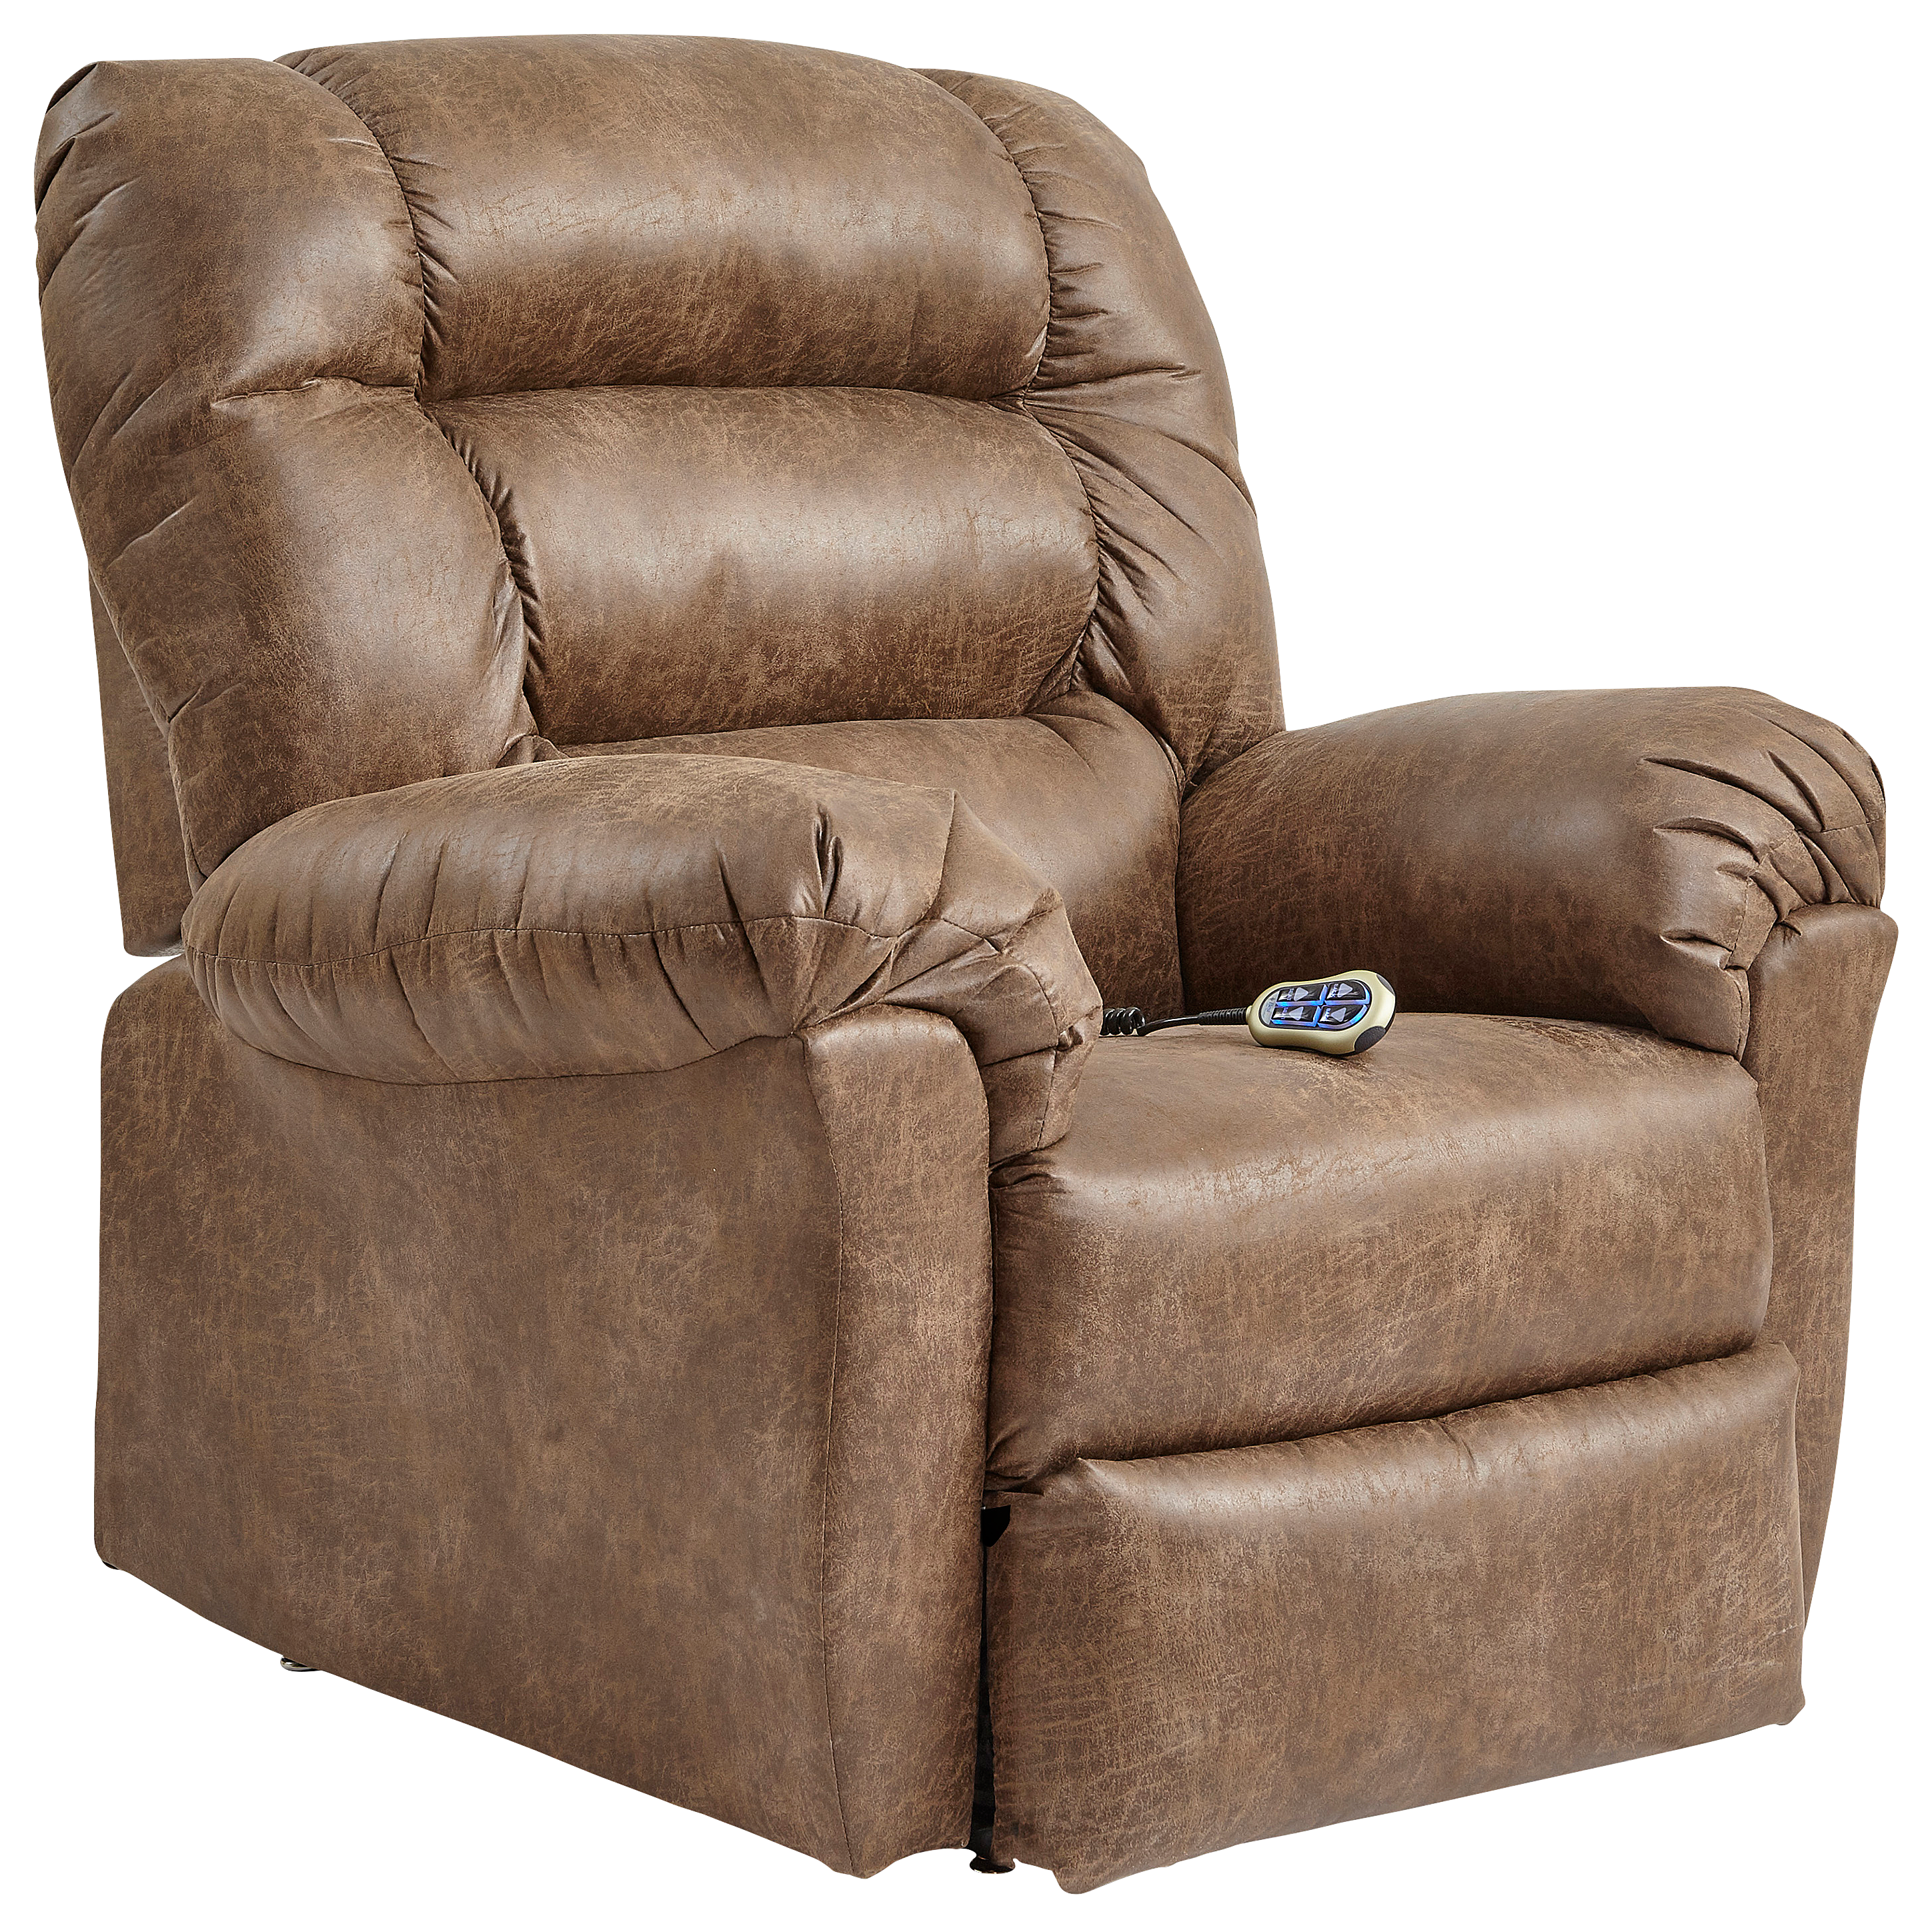 Best Home Furnishings The Beast Furniture Collection Troubador Power Lift Recliner